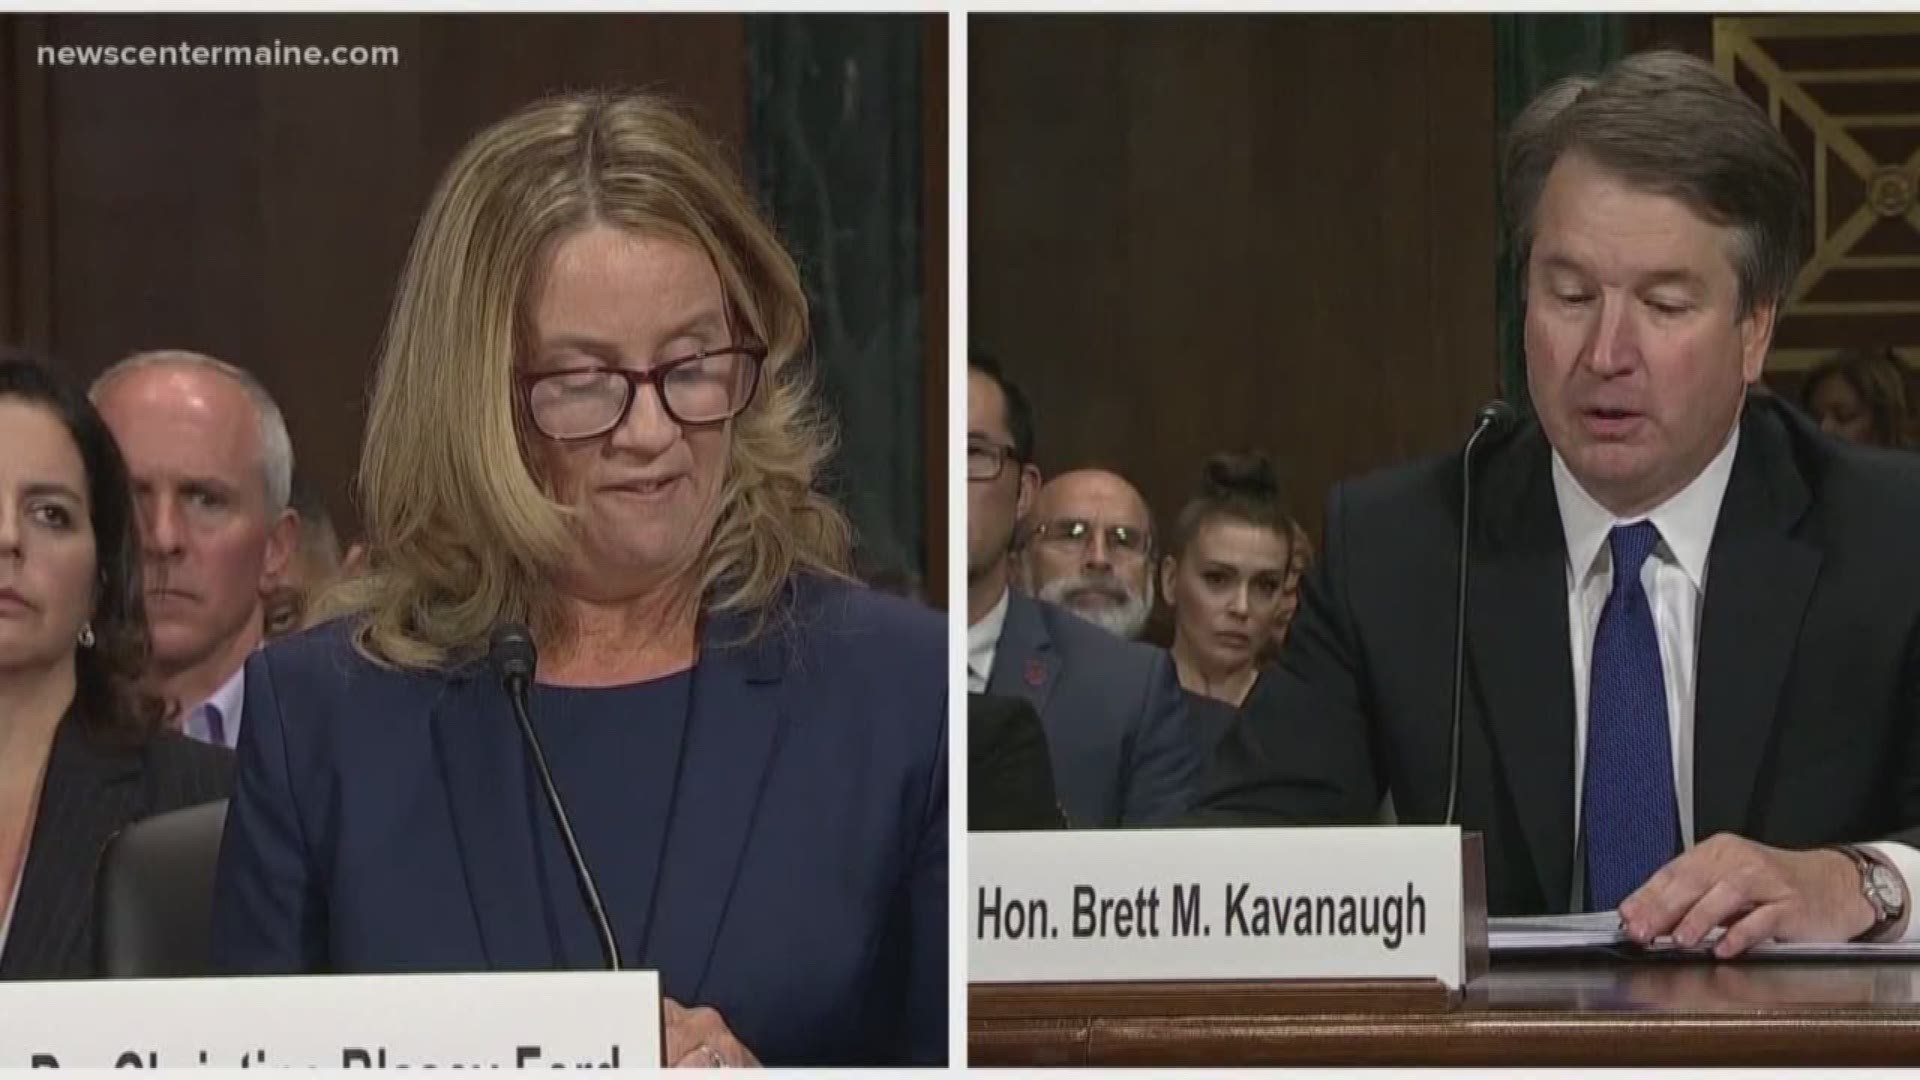 Dr. Christine Blasey Ford's testimony came more than a week after she came forward alleging that Brett Kavanaugh sexually assaulted her at a party when they were teenagers. 